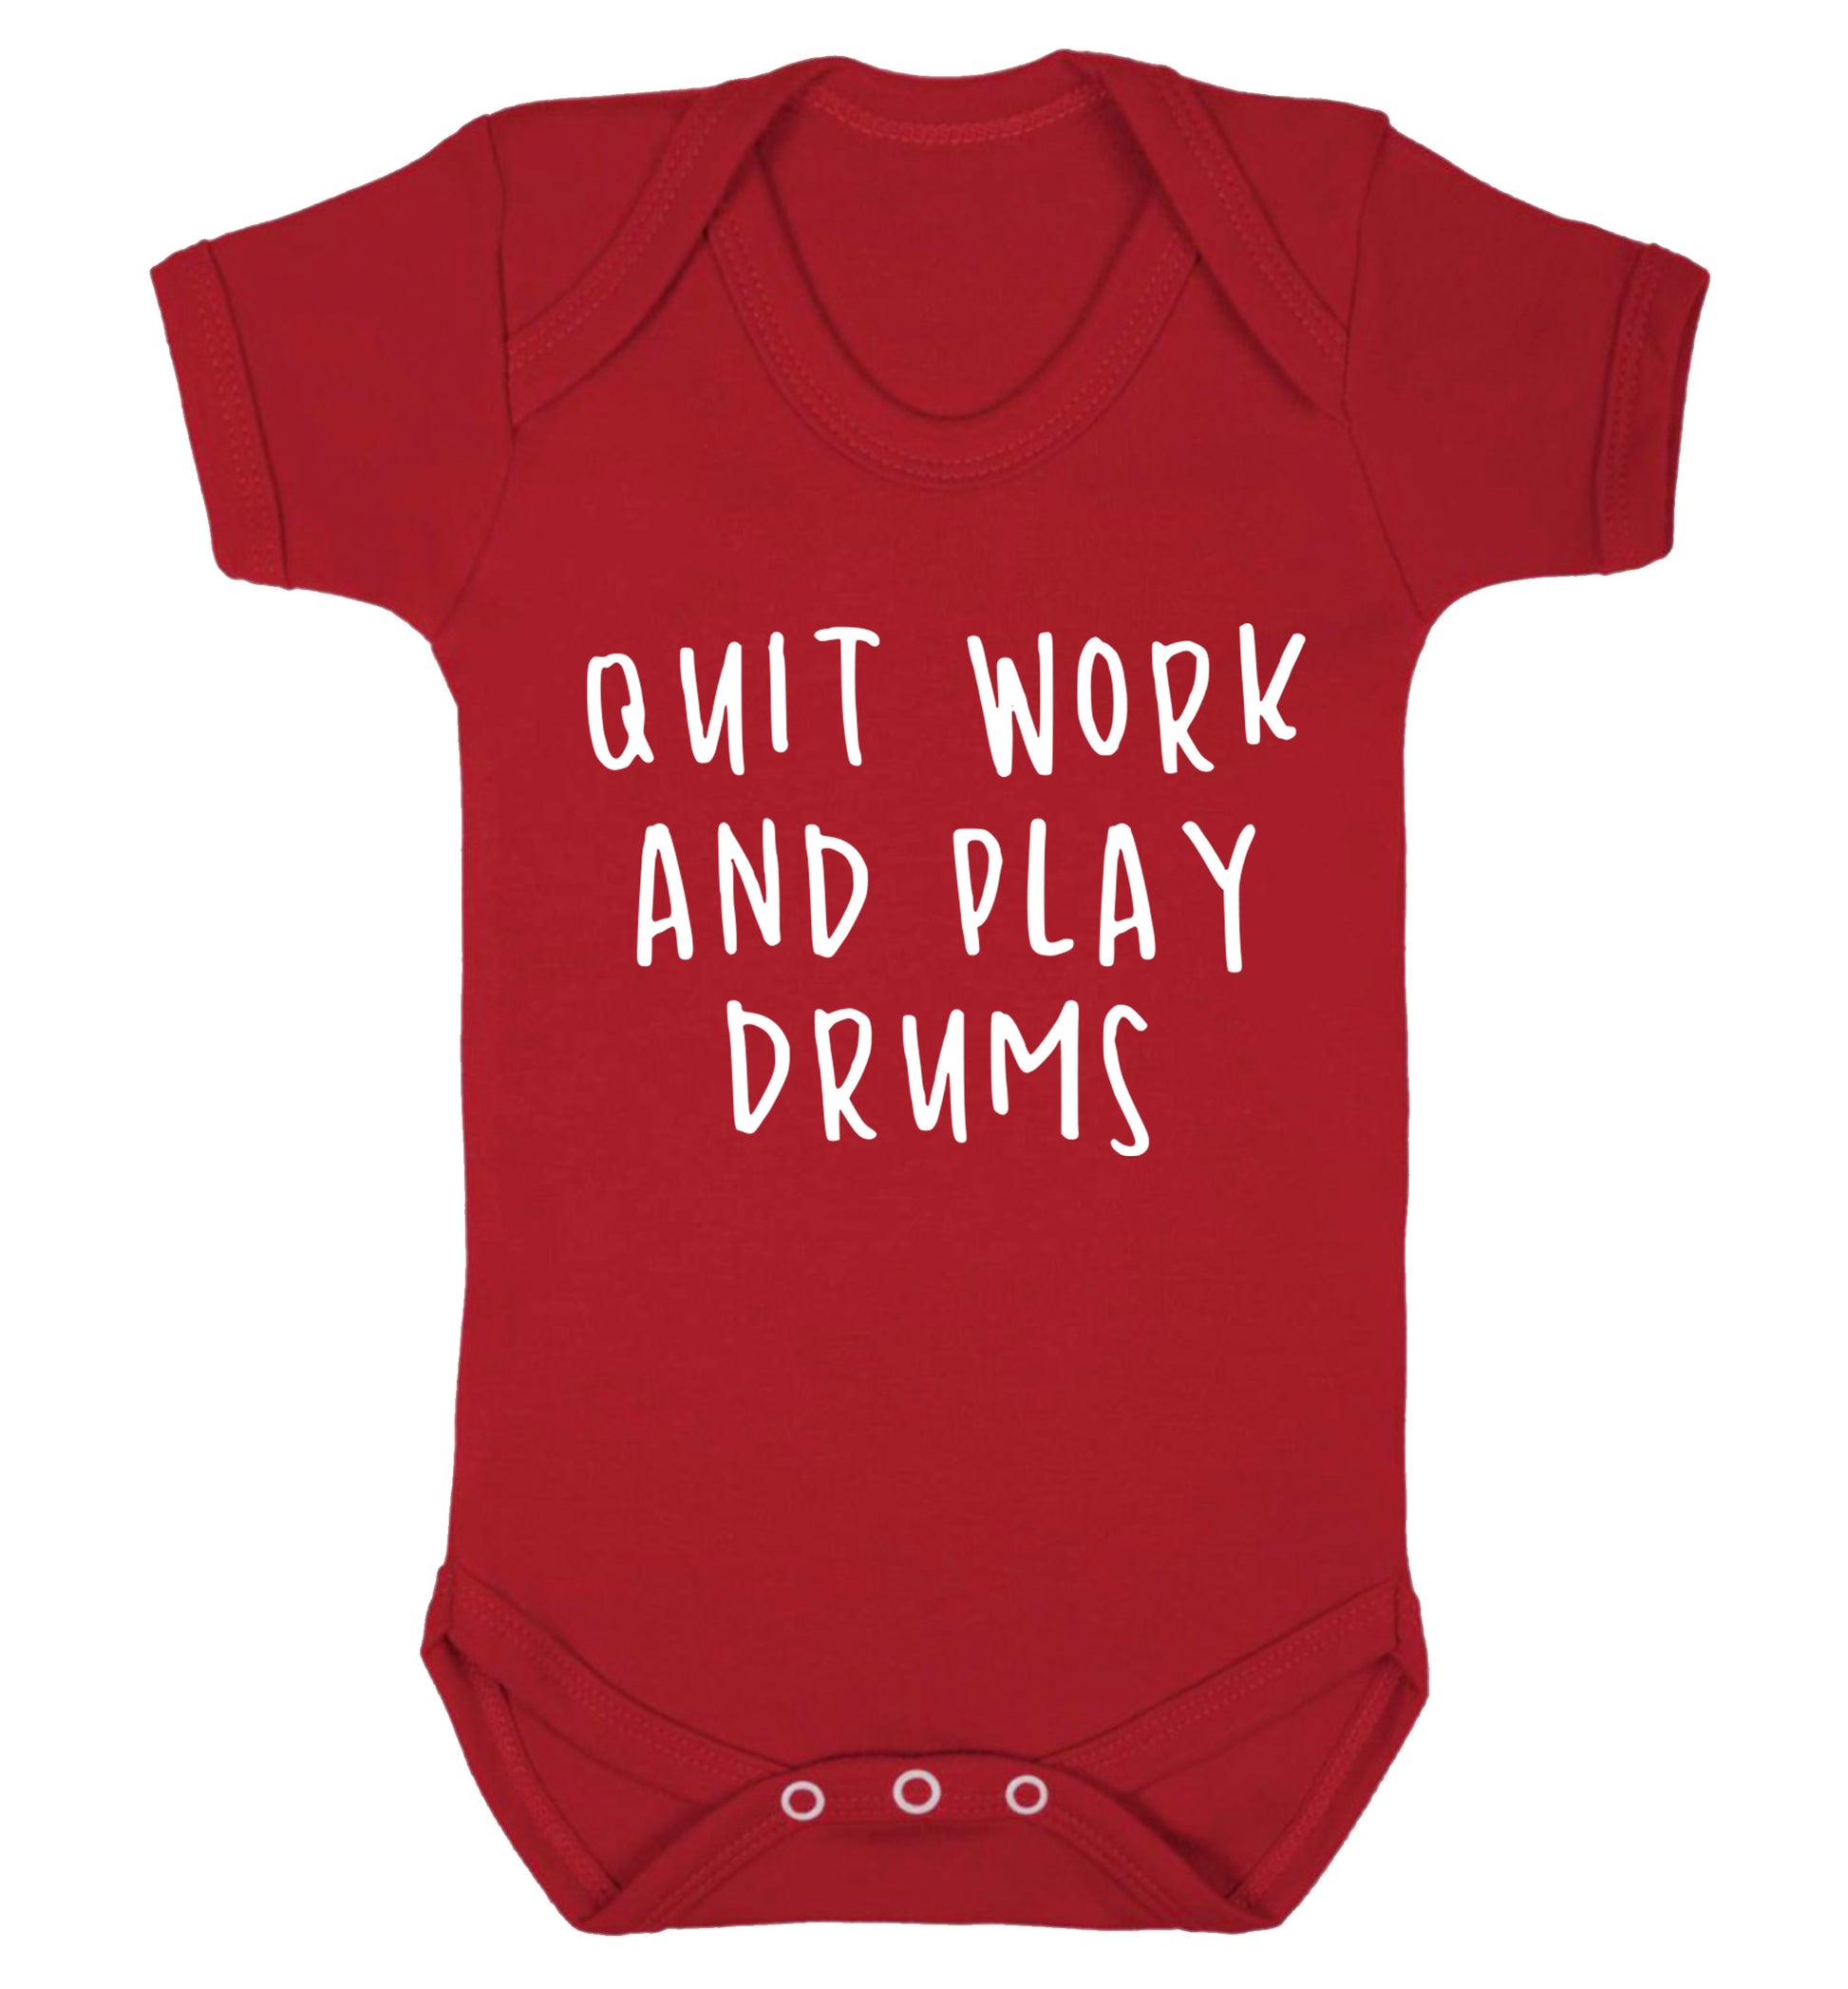 Quit work and play drums Baby Vest red 18-24 months